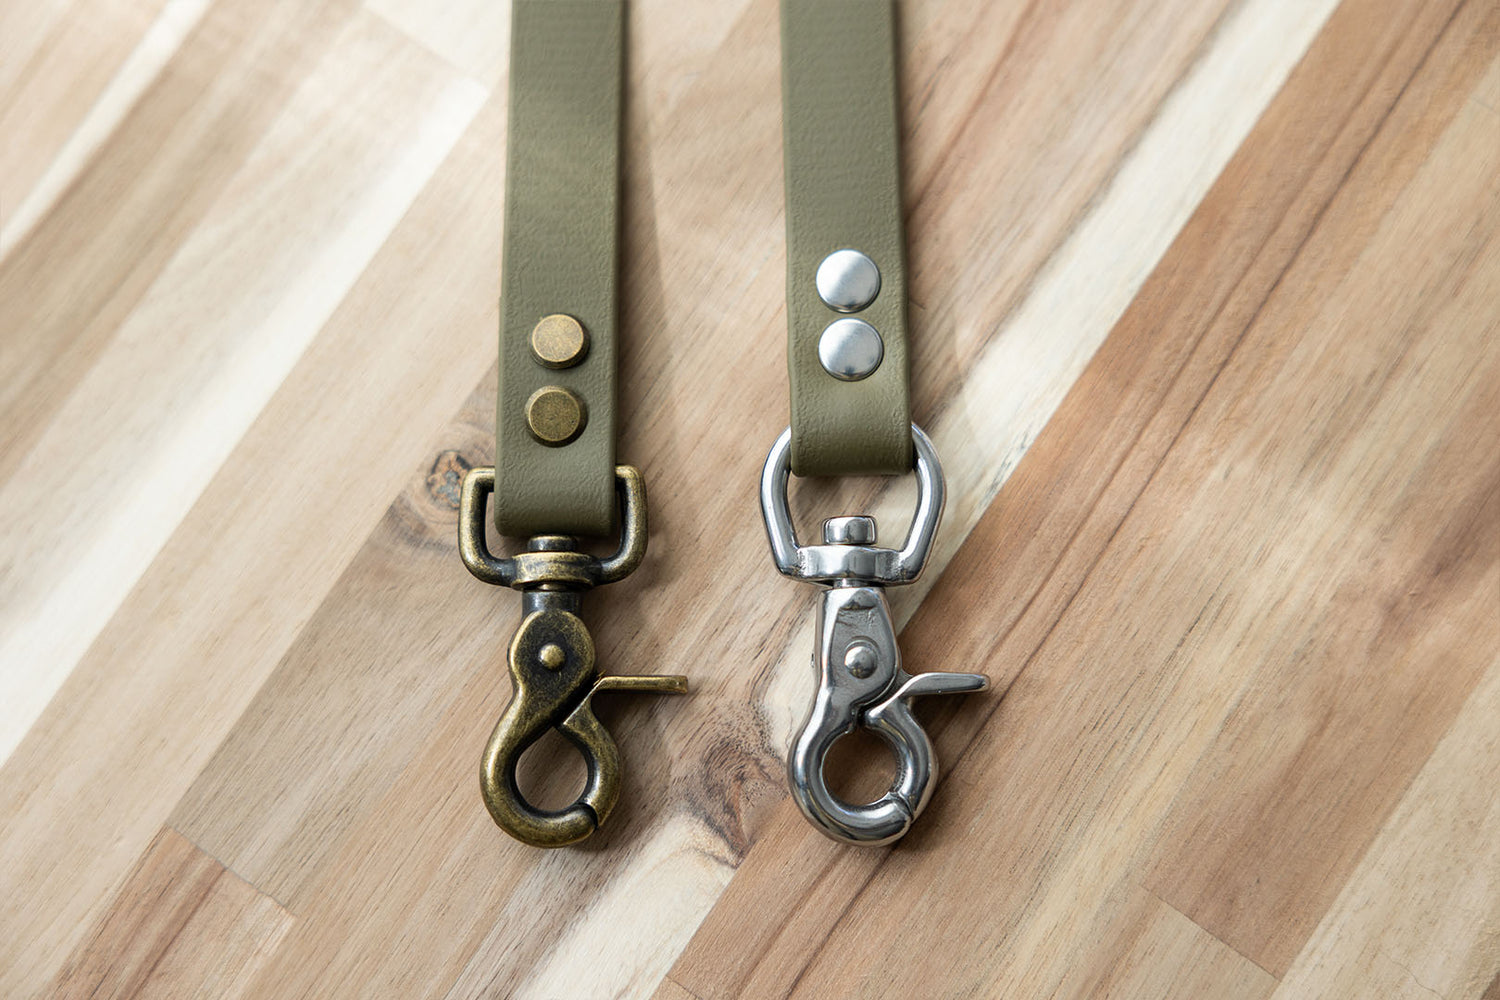 moss-biothane-dog-leads-stainless-steel-antique-brass-hardware